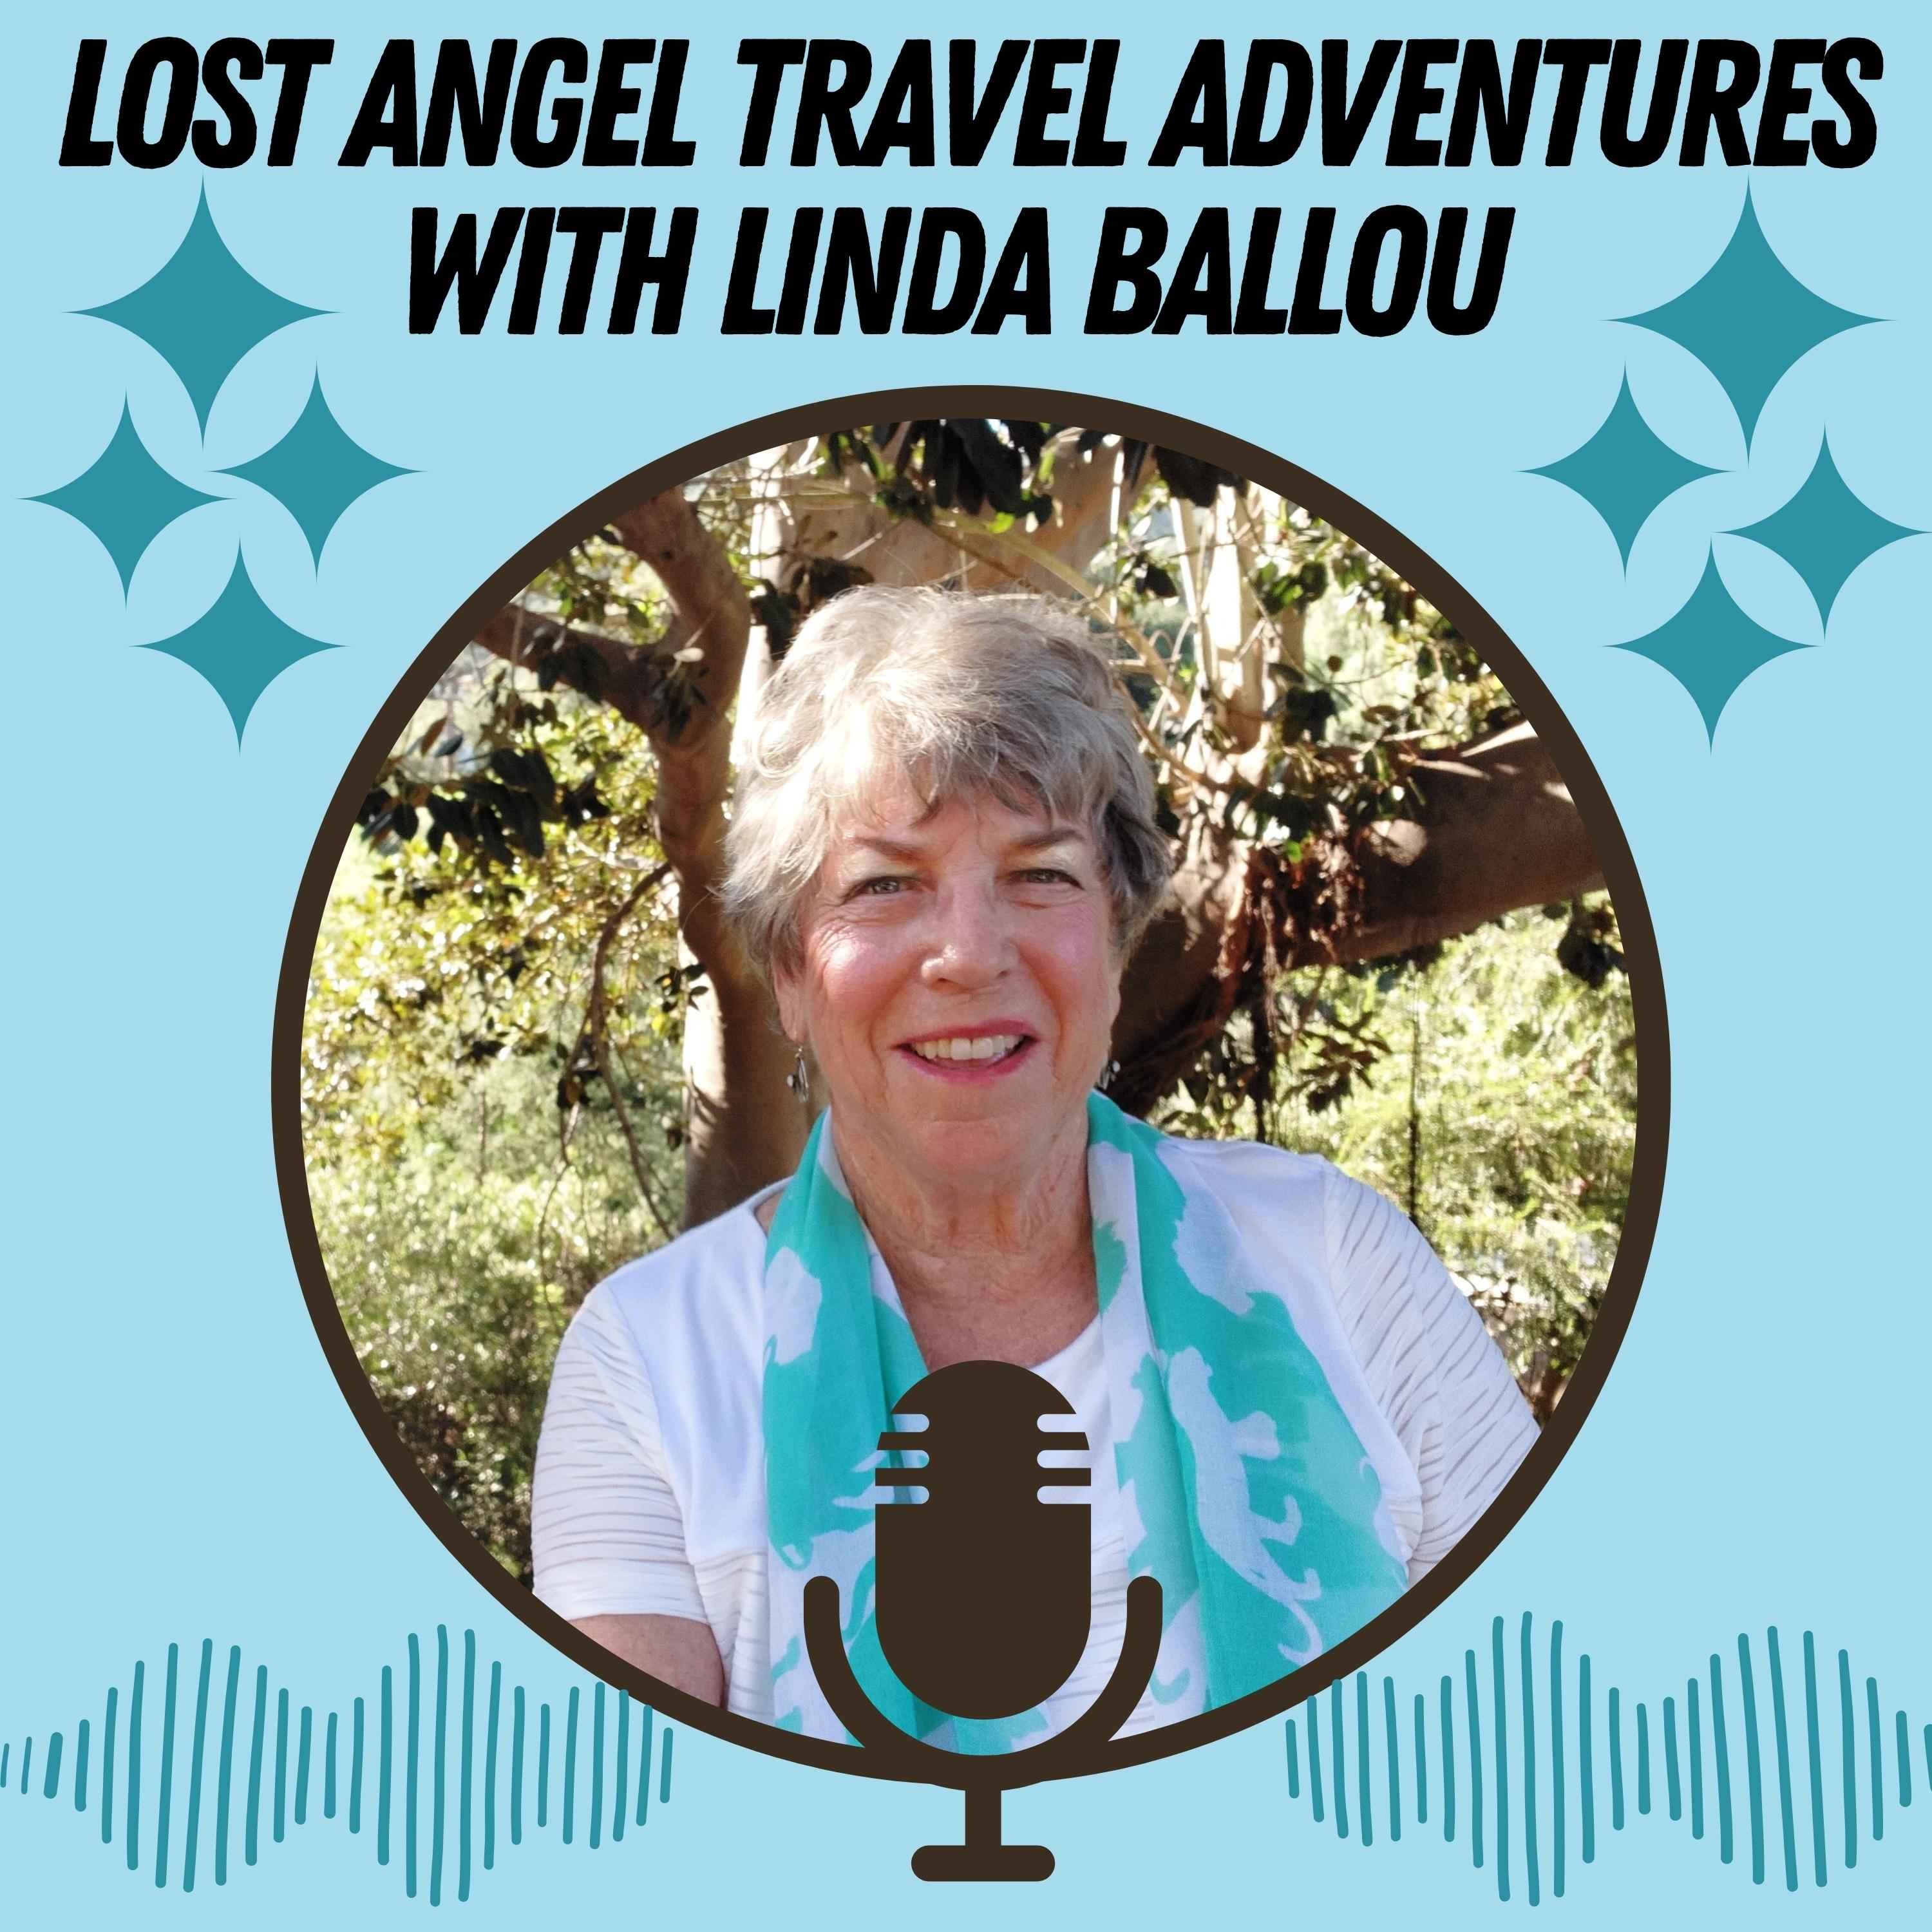 Lost Angel Travel Adventures with Linda Ballou